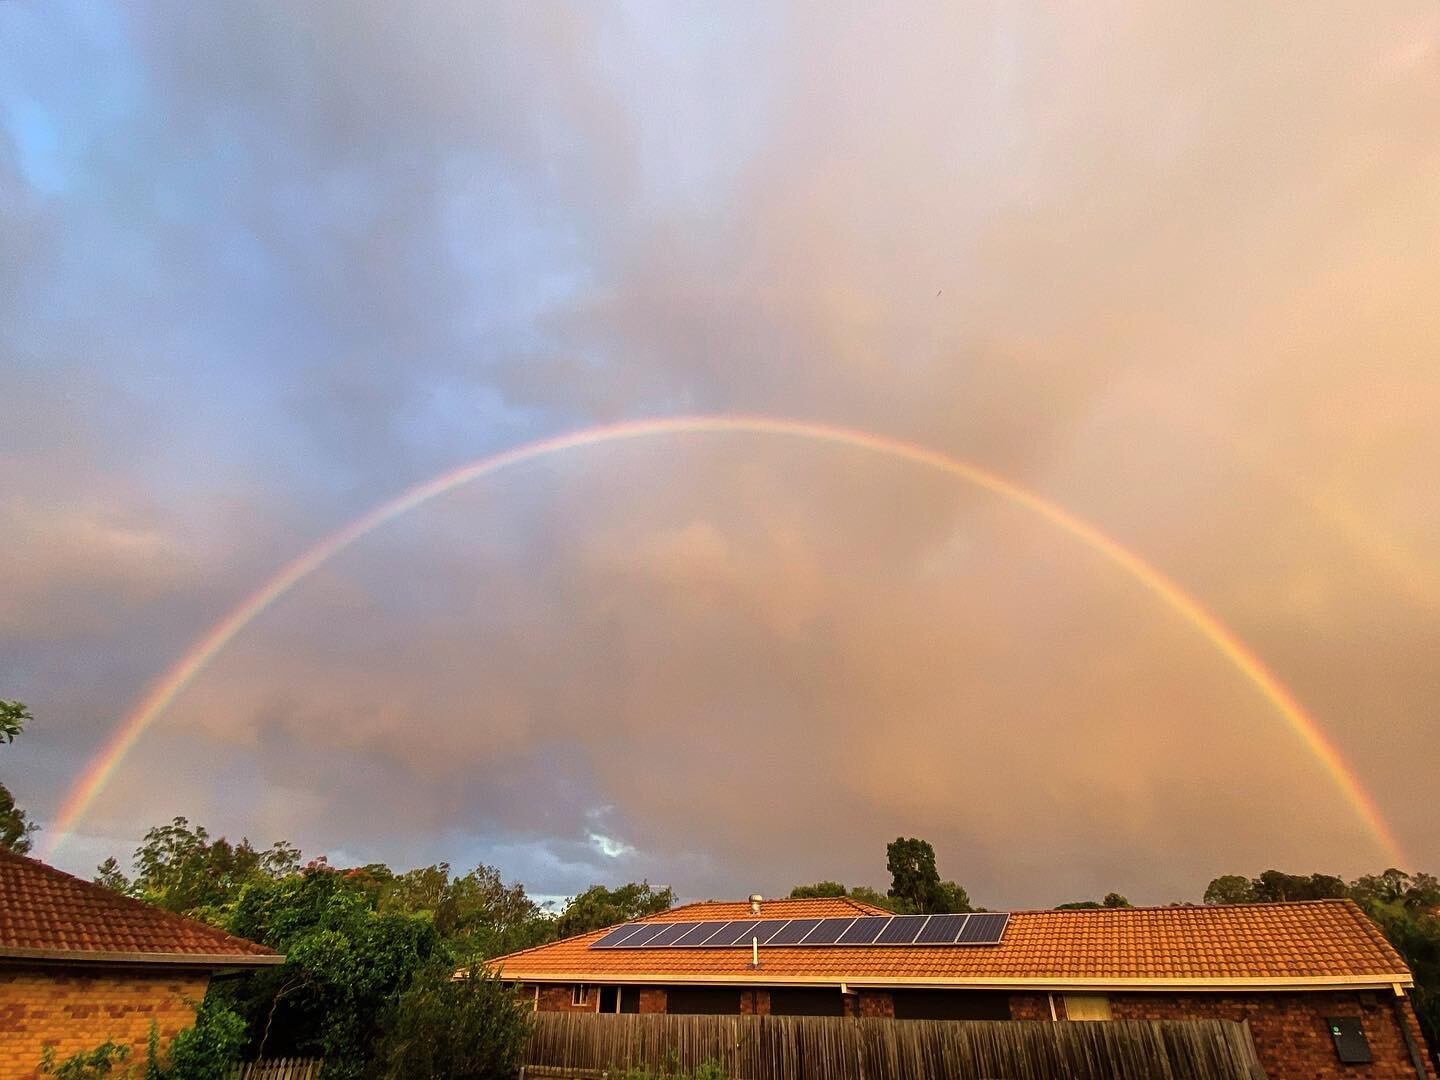 A double rainbow - second one is hidden🌈 a last hurrah for 2020 
.
.
.
.
#goldcoast #rainbow #doublerainbow #doublerainbow🌈🌈 #goodluck #justgoshoot #peoplescreatives #shotoniphone #iphonography #photography #photooftheday #qld #queensland #austral